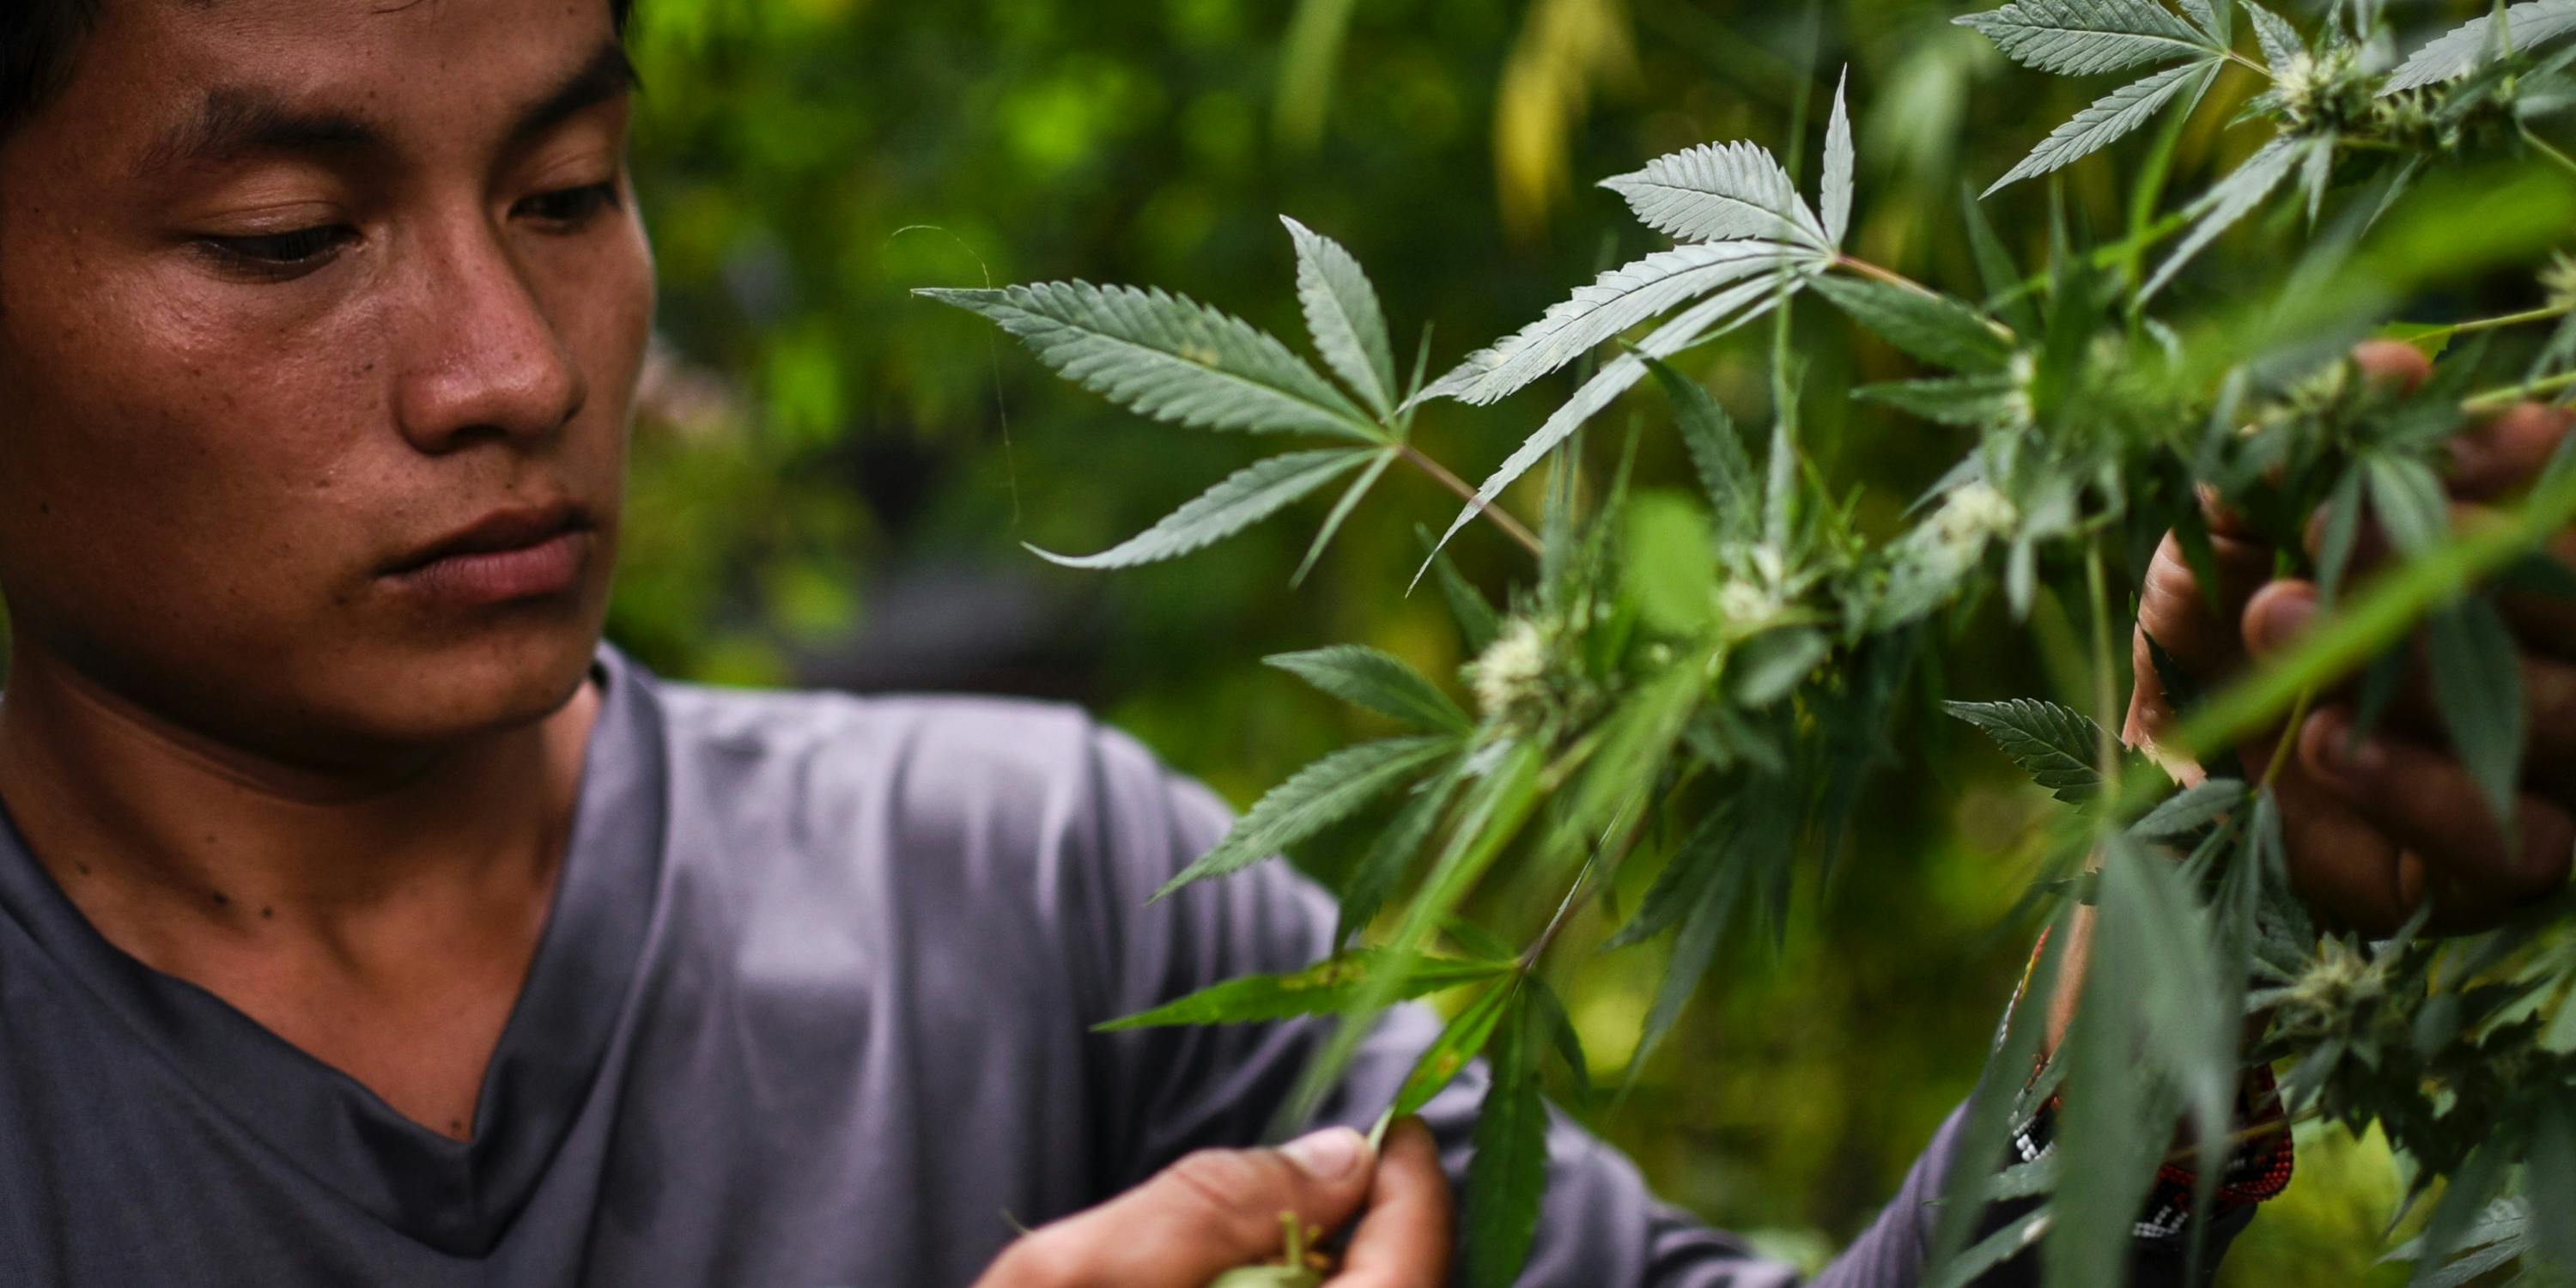 Colombia may soon become a world supplier of medical marijuana